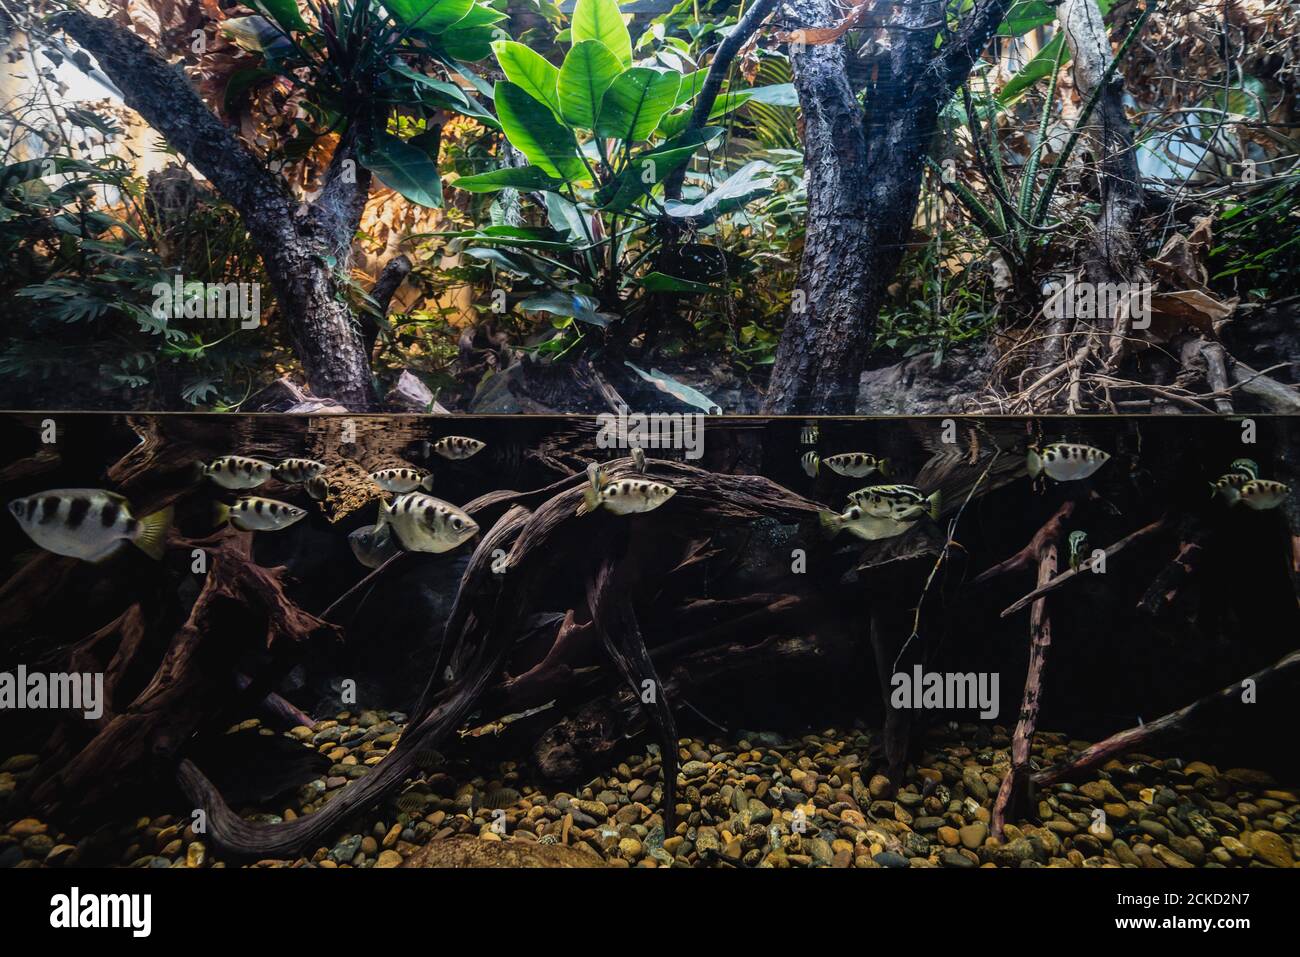 Bunch of fish gathered in an half underwater scene split between under water bursting life and thick surface flora in a perfect ecosystem Stock Photo